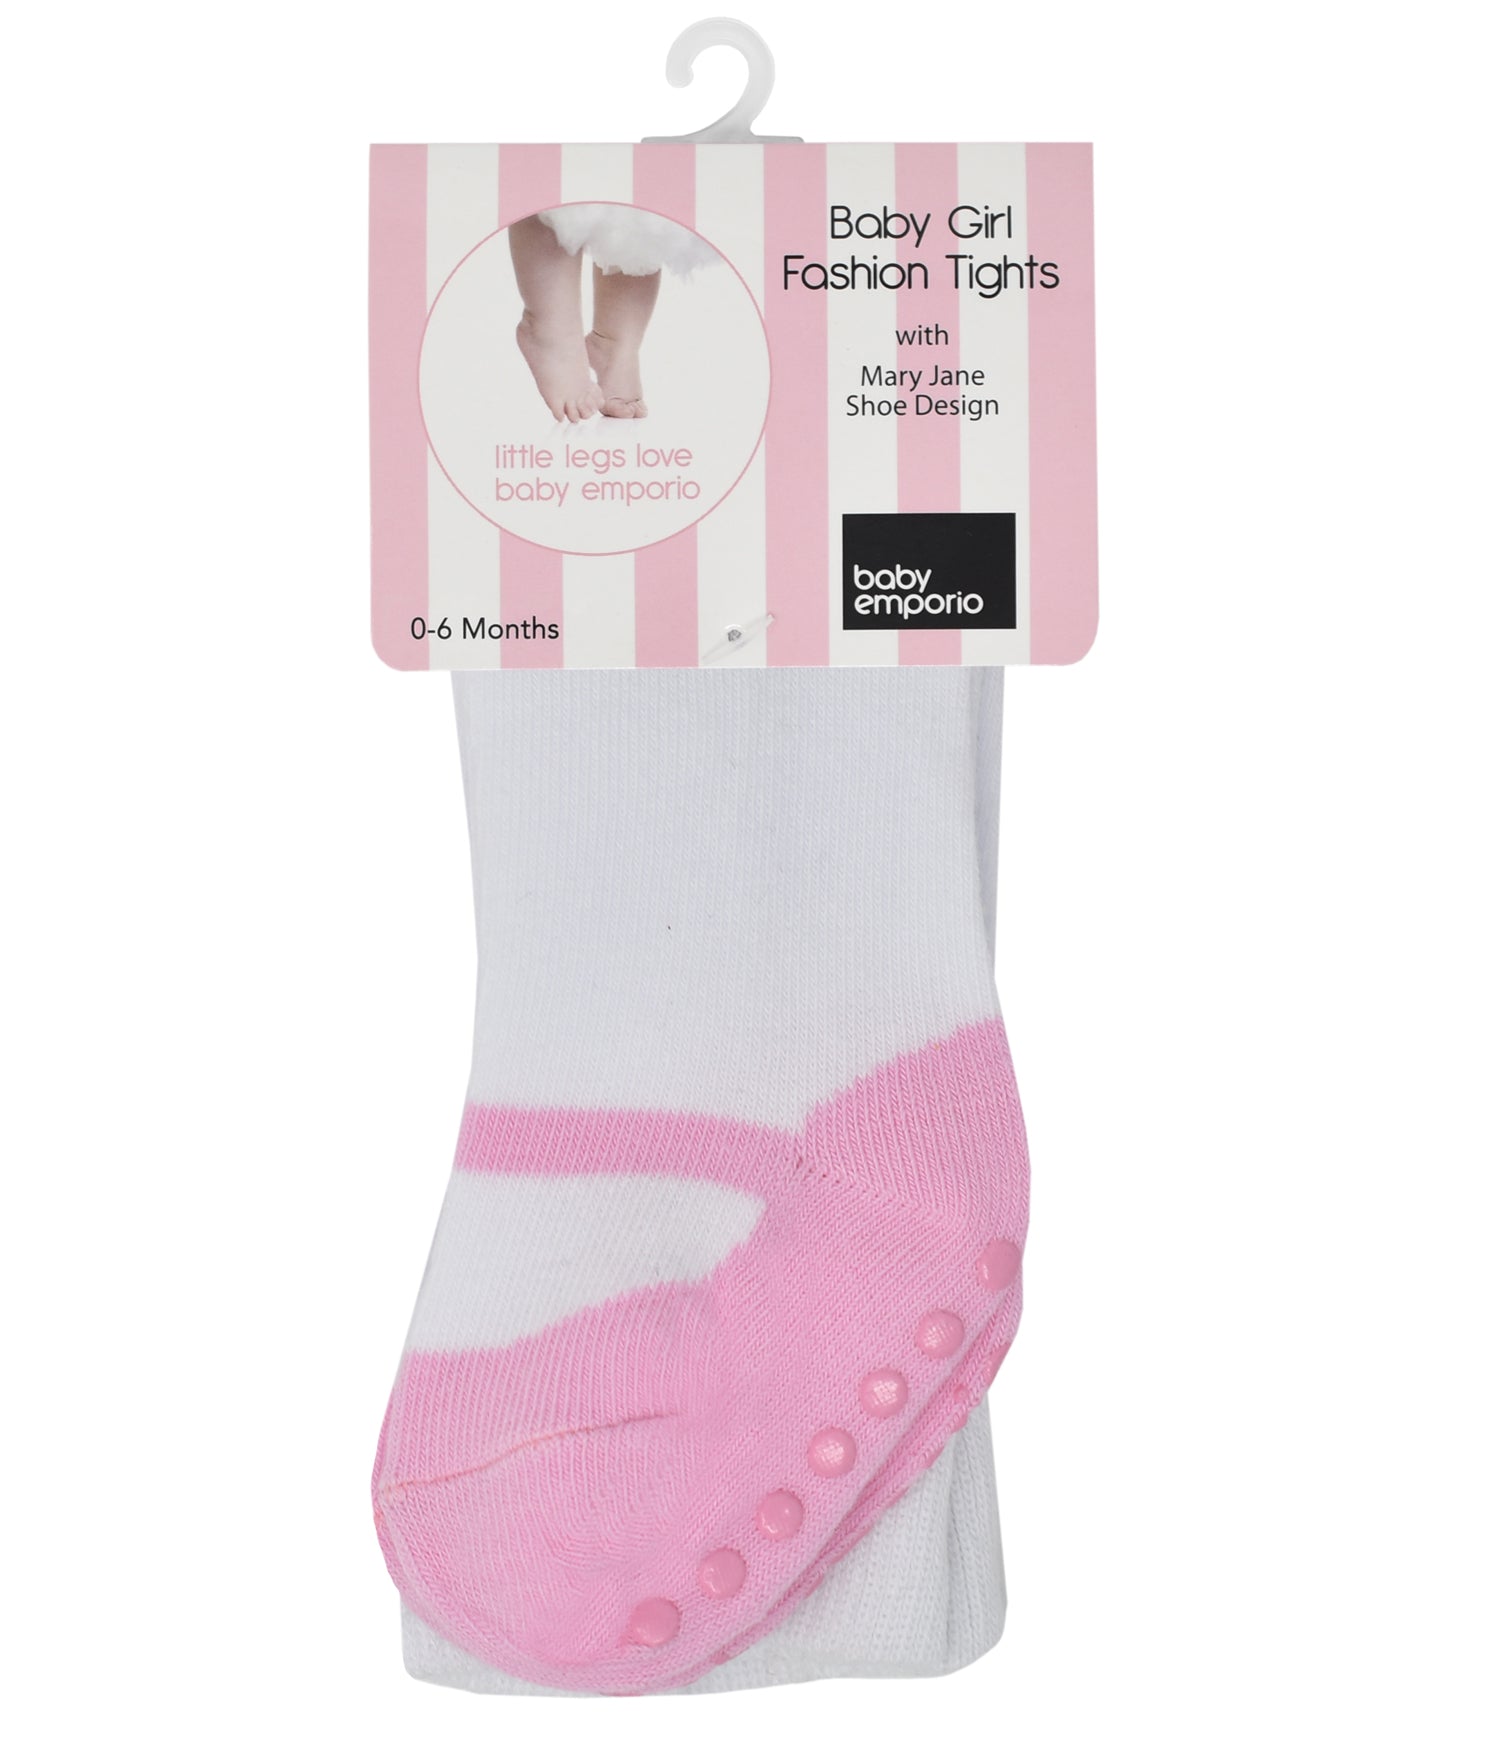 Baby infant girl pink Mary Jane shoe look tights on hanger